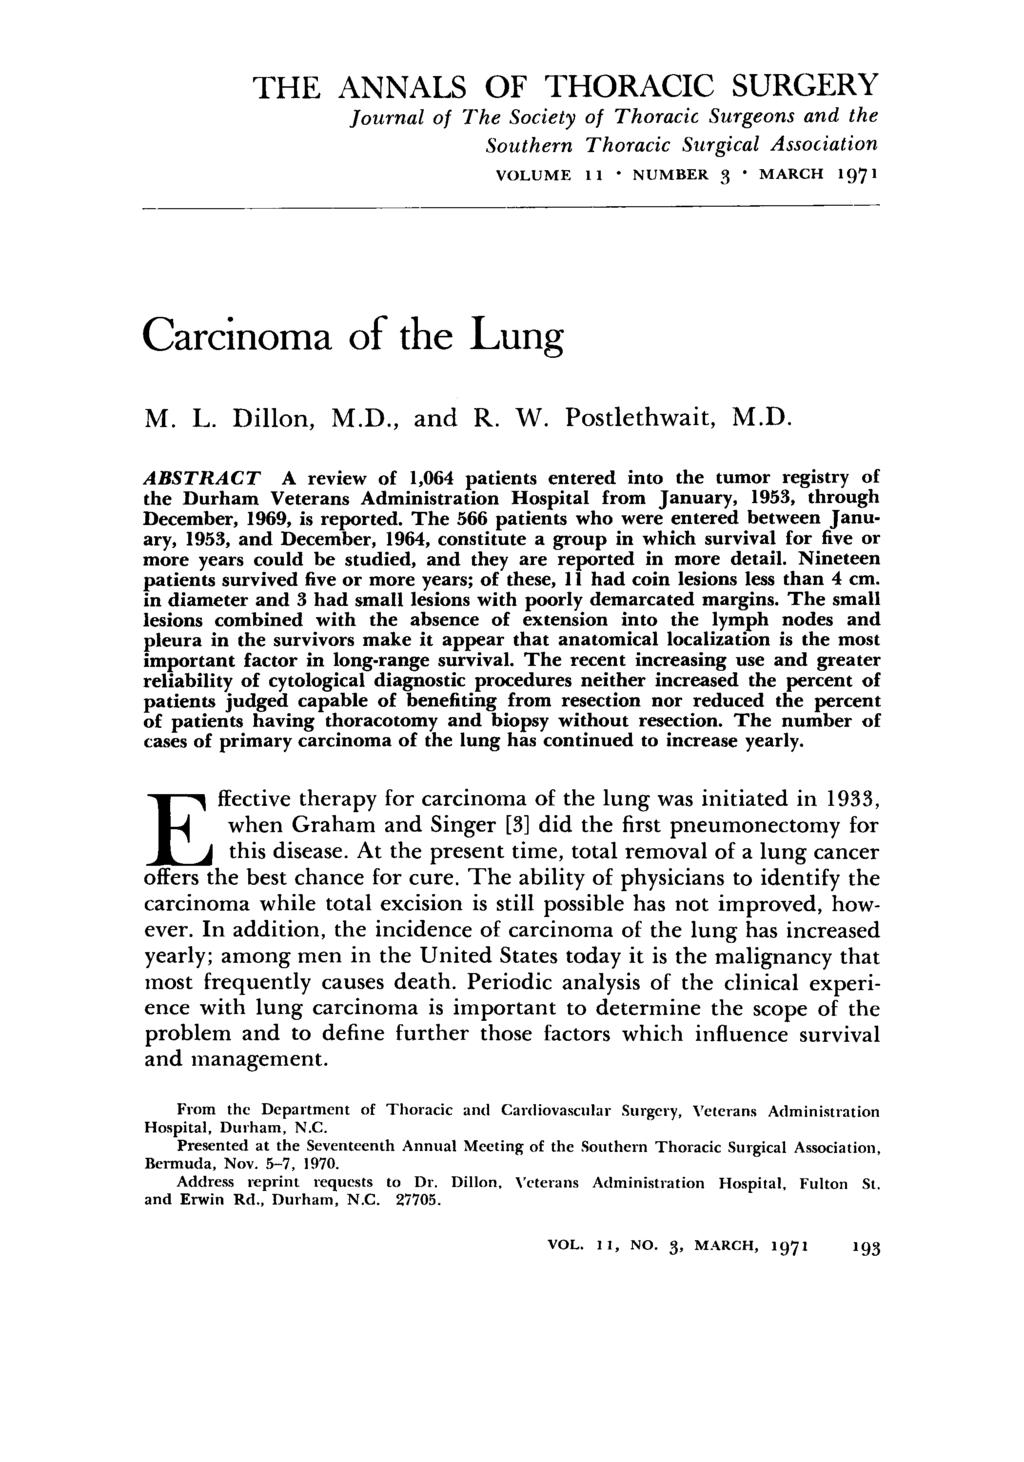 THE ANNALS OF THORACIC SURGERY Journal of The Society of Thoracic Surgeons and the Southern Thoracic Surgical Association VOLUME 1 I - NUMBER 3 0 MARCH 1971 Carcinoma of the Lung M. L. Dillon, M.D., and R.